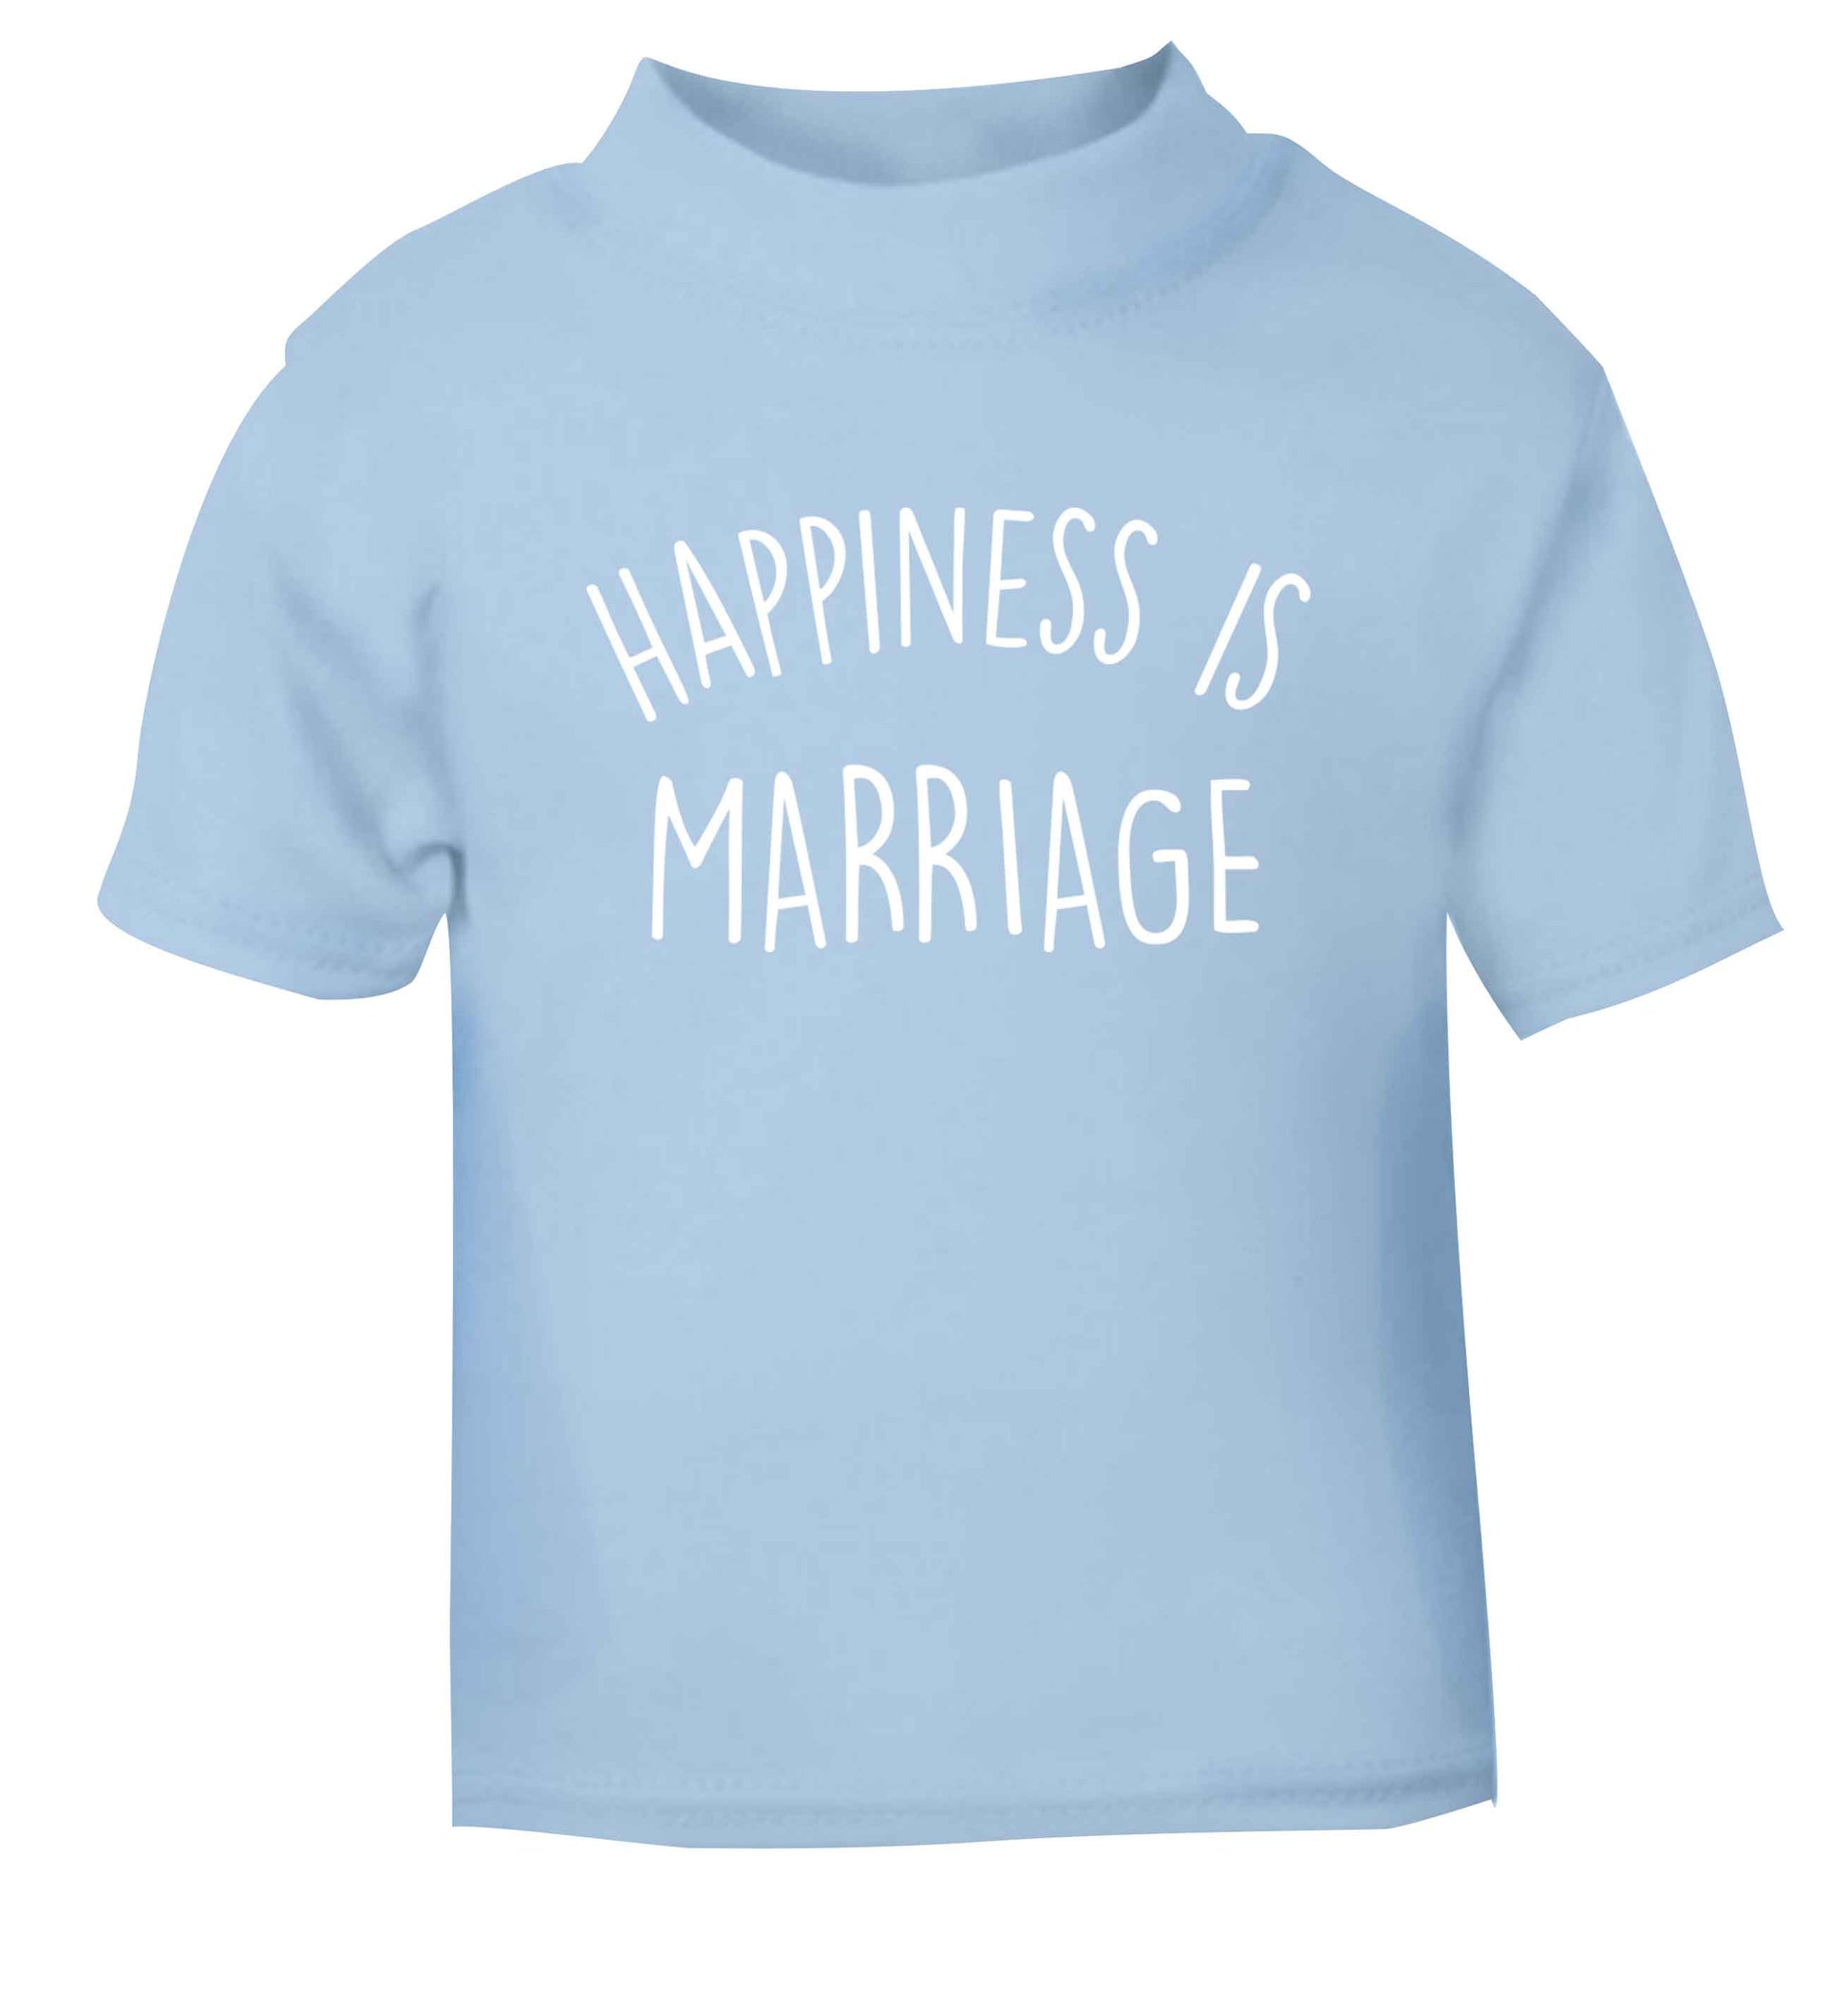 Happiness is wedding planning light blue baby toddler Tshirt 2 Years